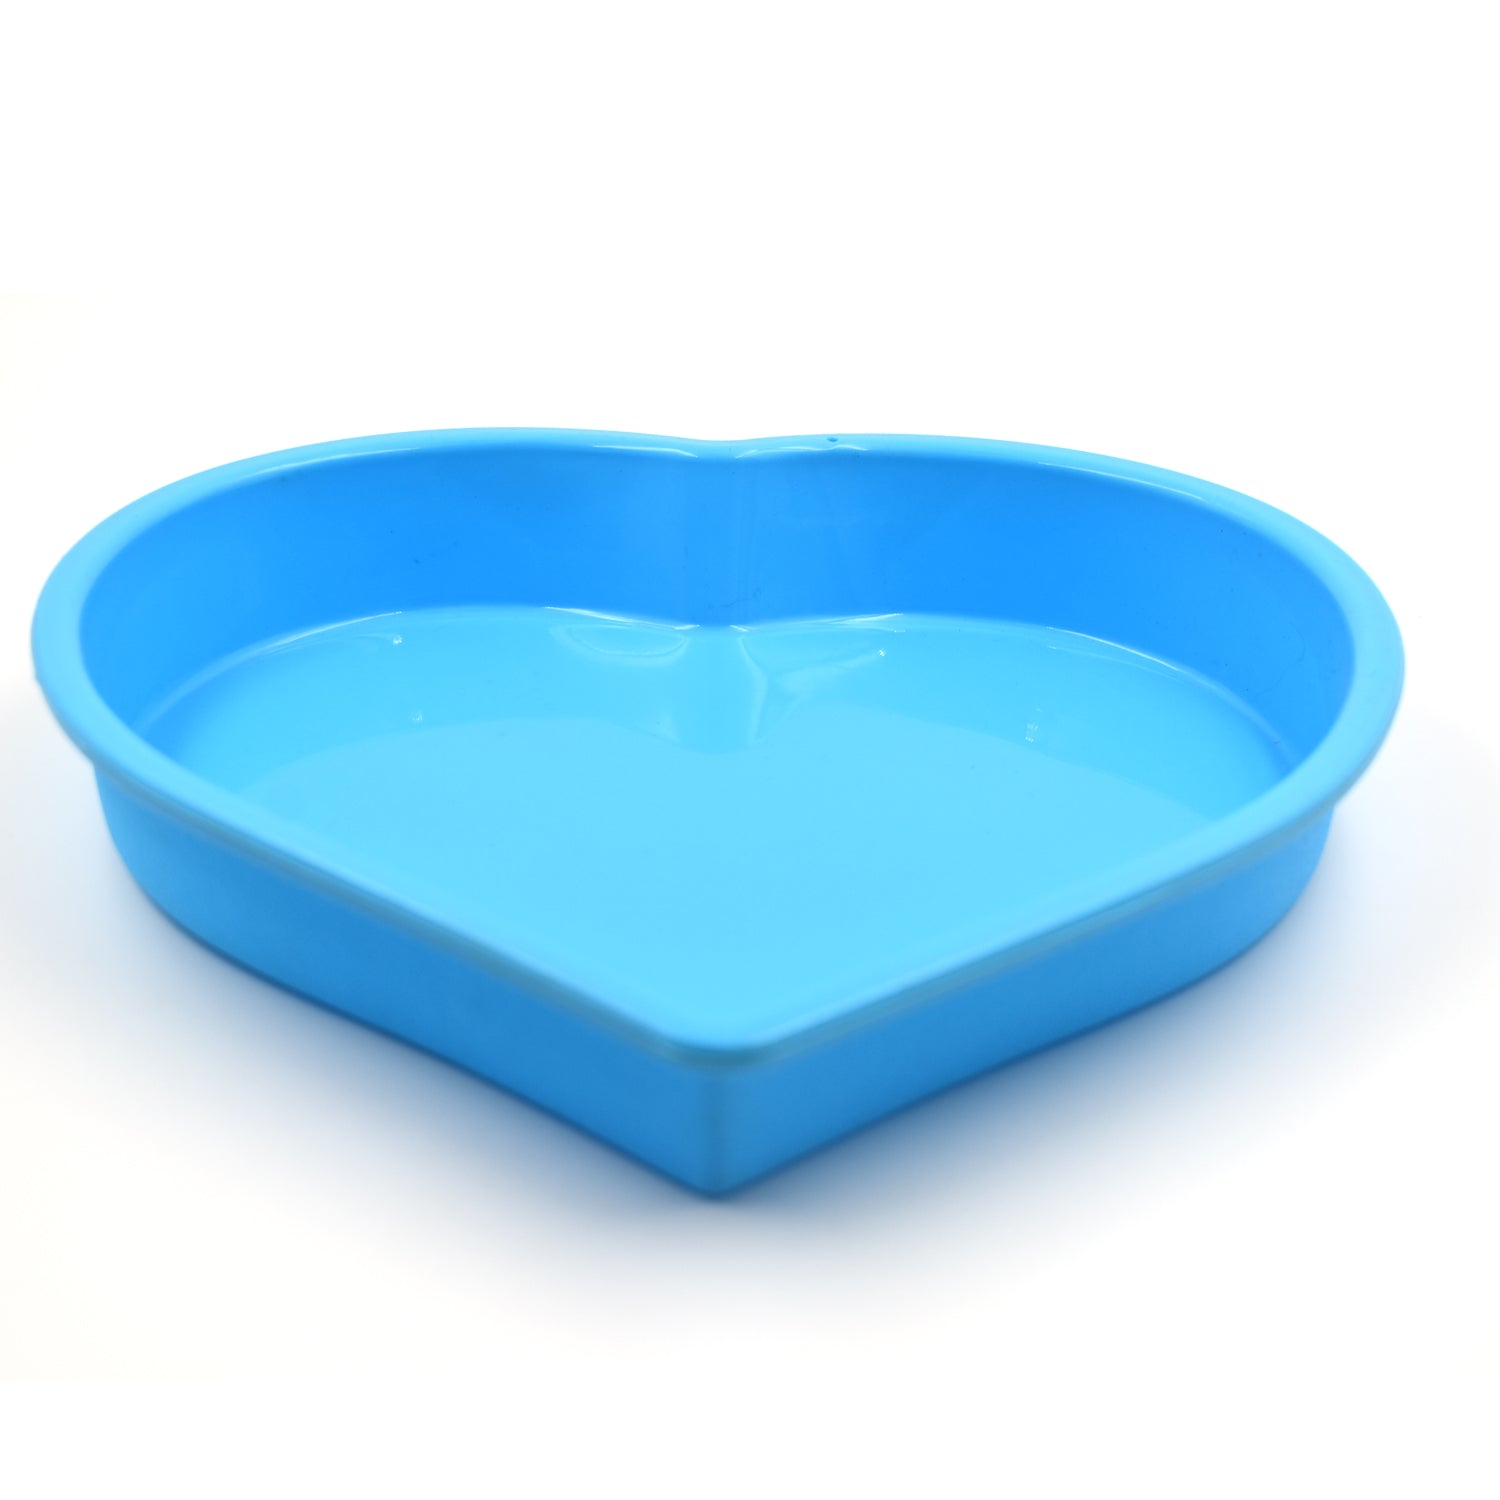 8064 Silicone Heart Shape Silicone Bakeware Cake Mold Cupcake/Muffin Mould  (Pack of 1)